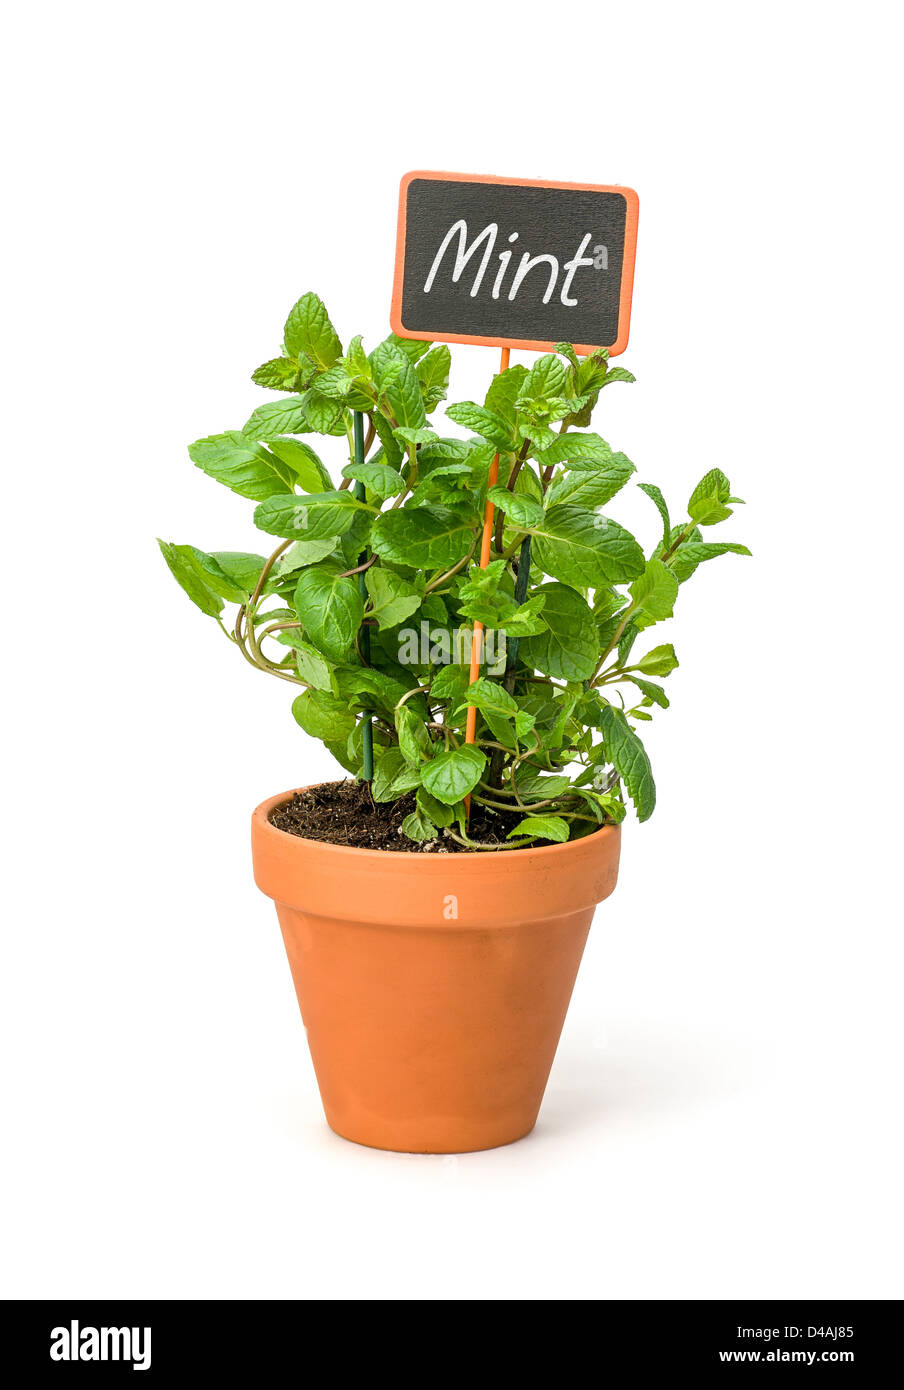 Mint in a clay pot with a wooden label Stock Photo